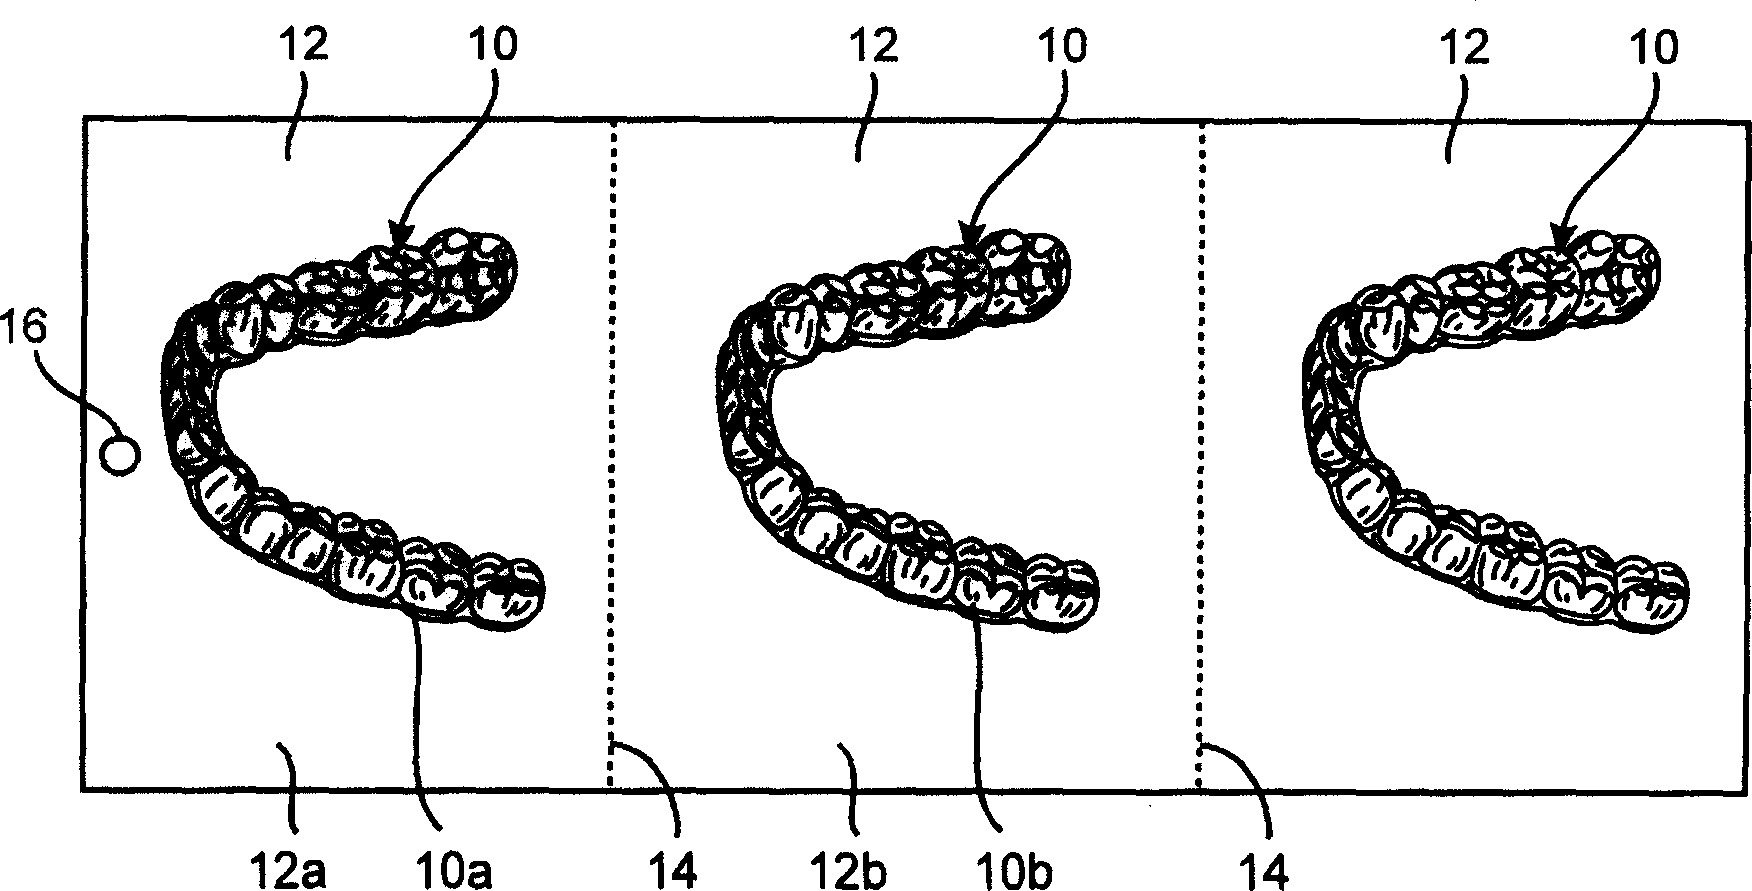 Dental appliance sequence ordering system and method